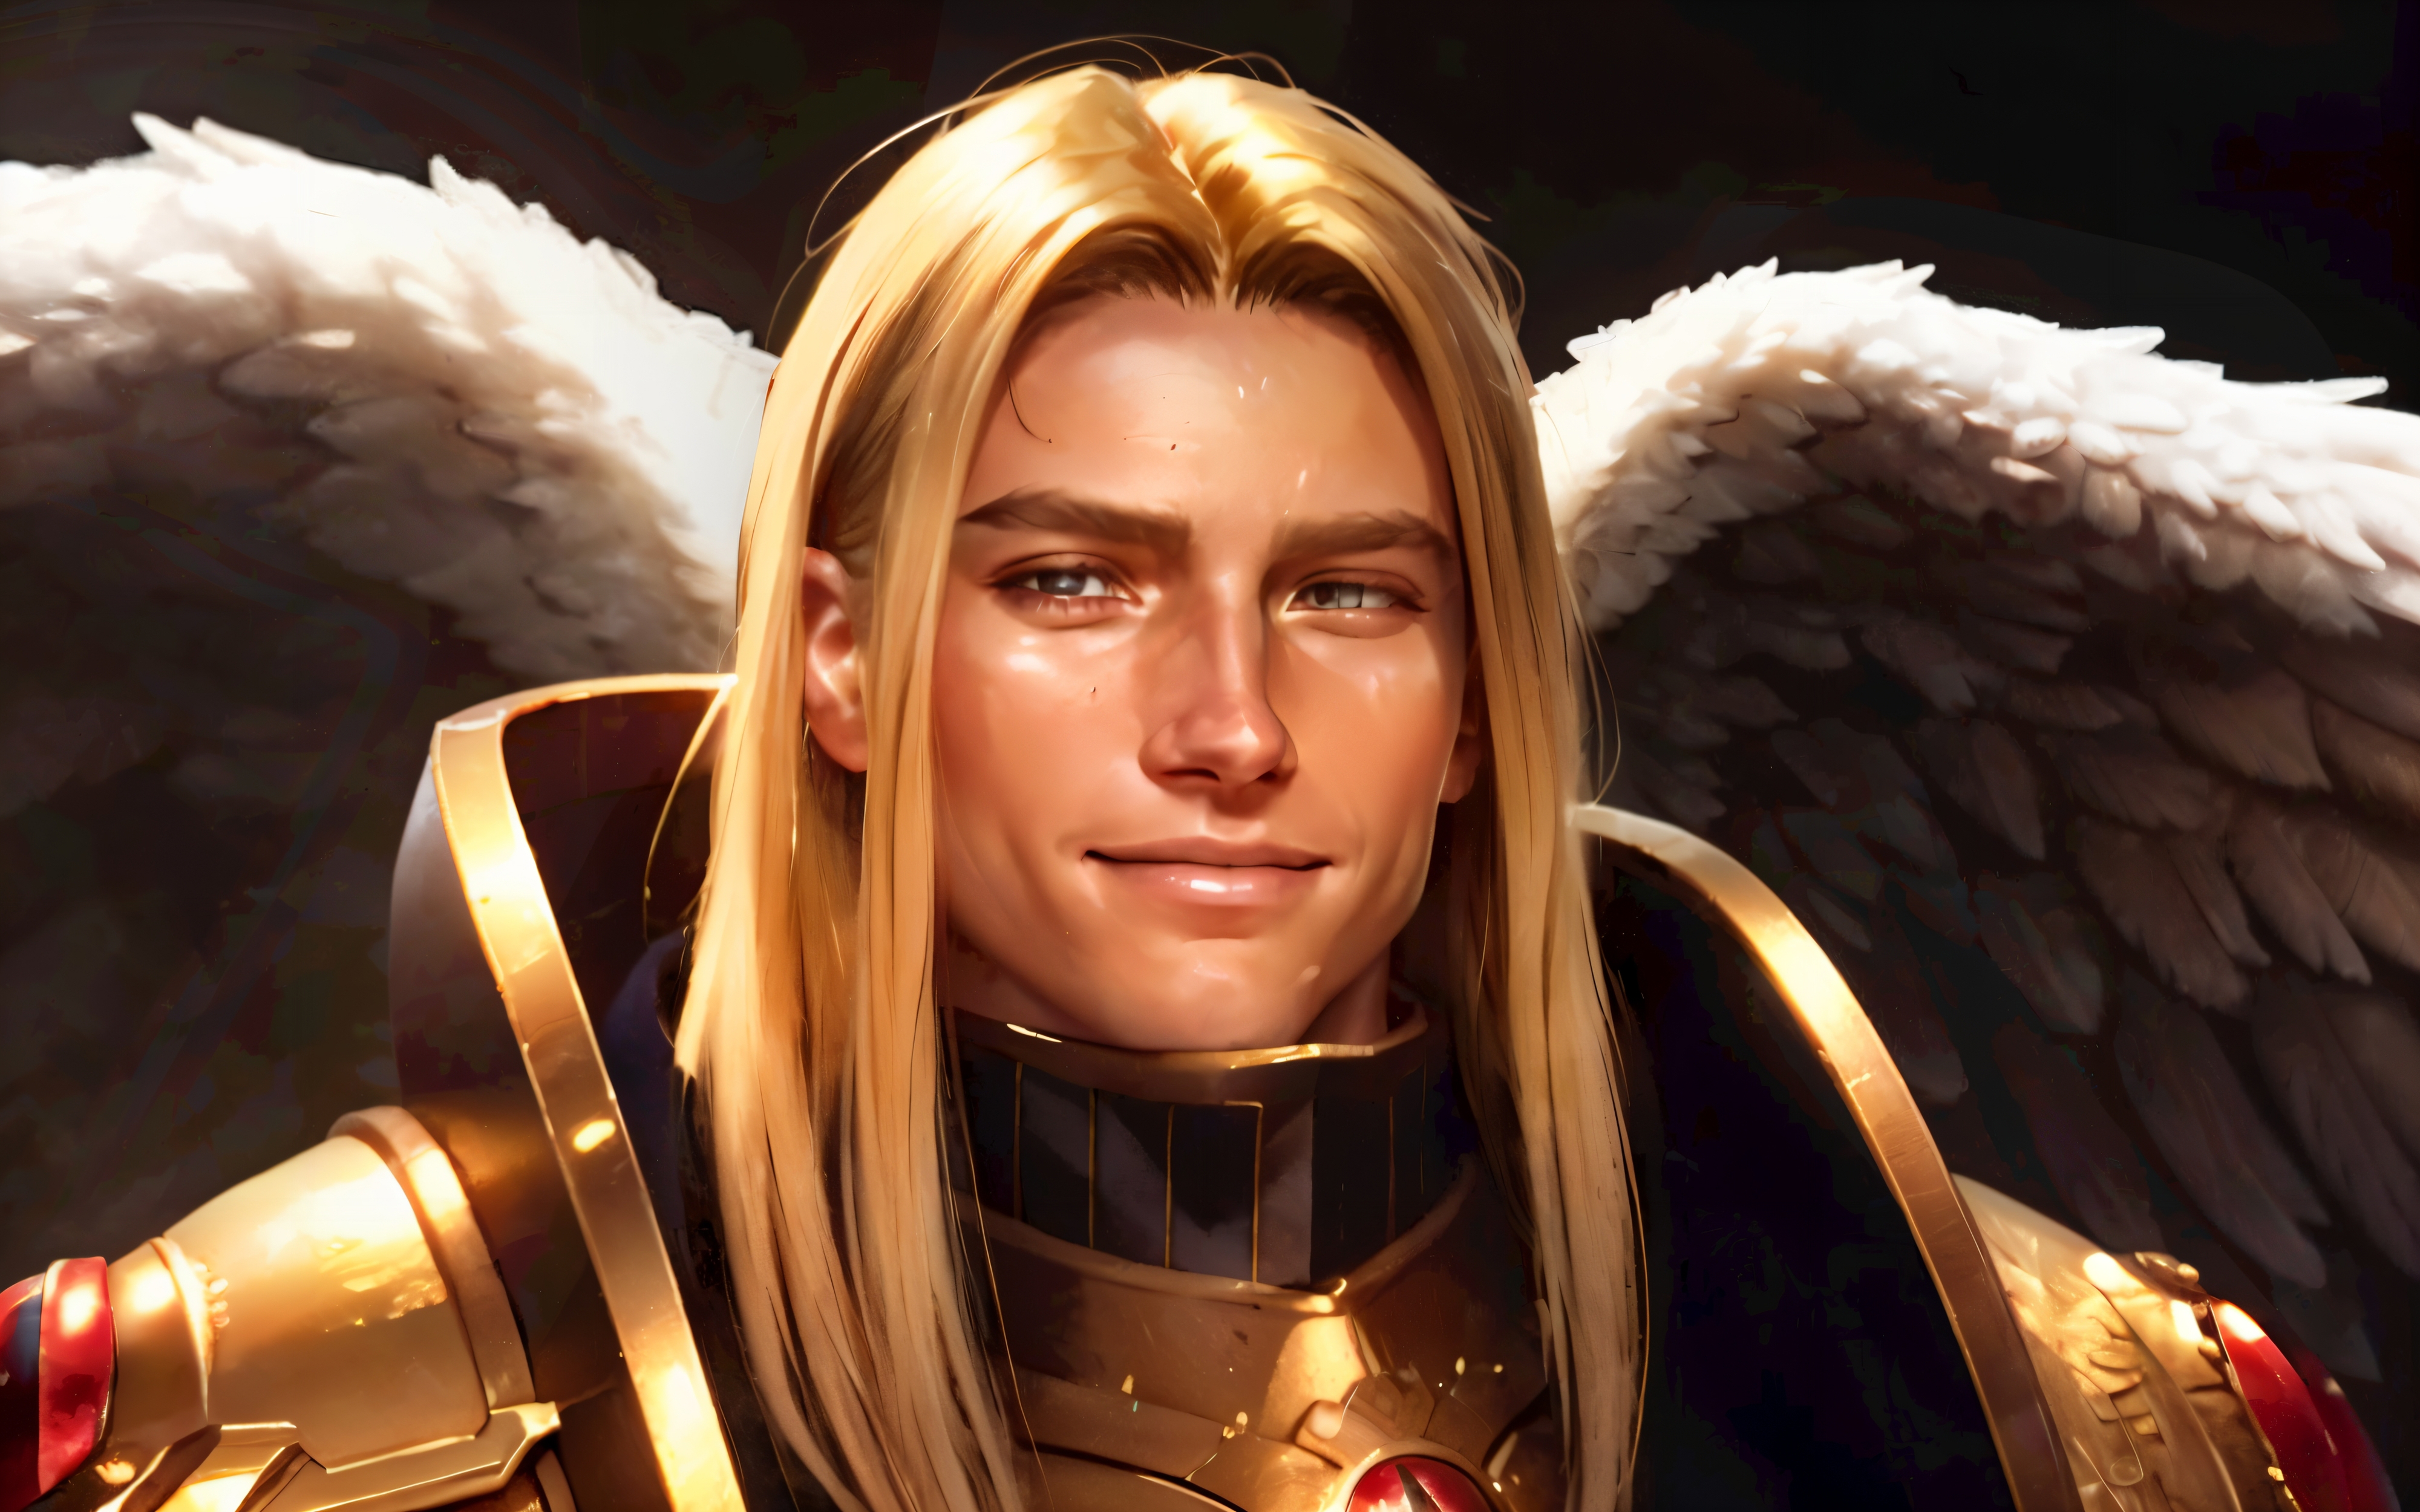 Sanguinius, The Great Angel image by auzdasproduction4370